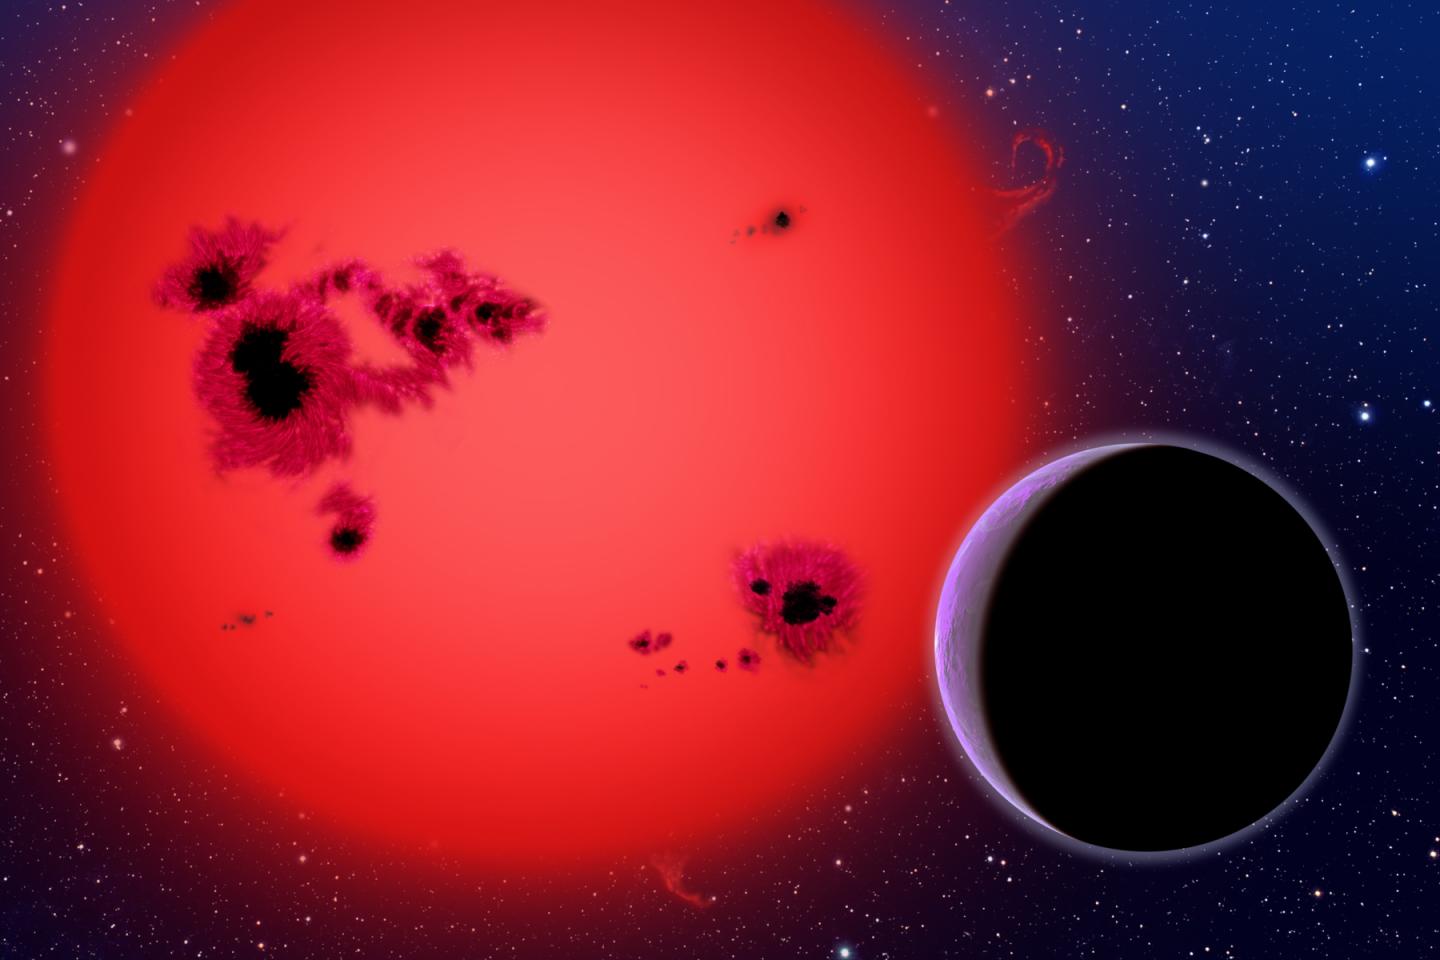 Artist's Impression of Red Dwarf Star with Planet